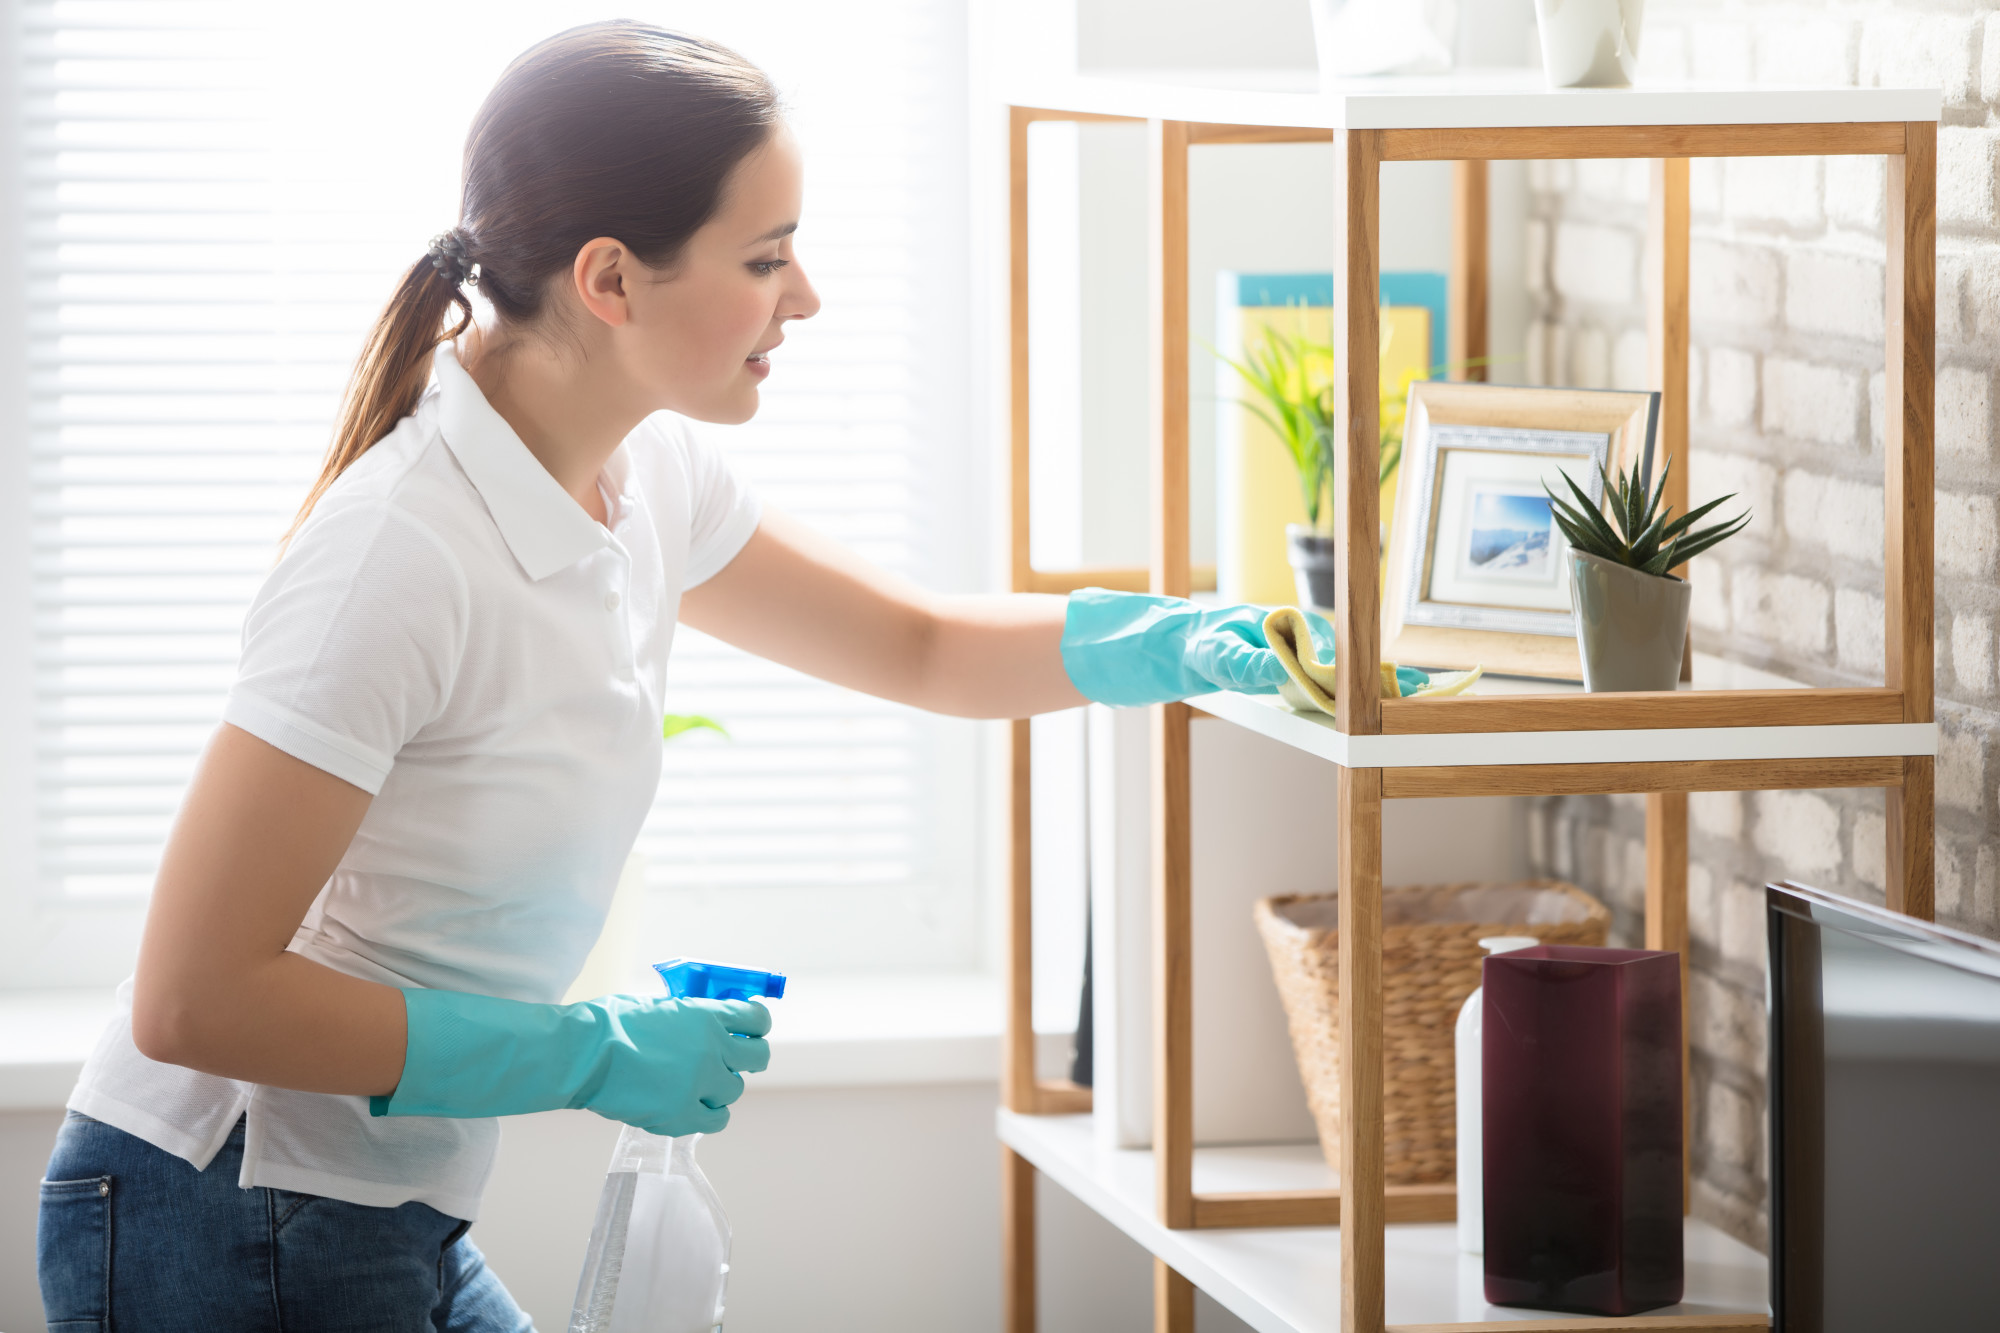 House cleaning services in Lawrencville, GA